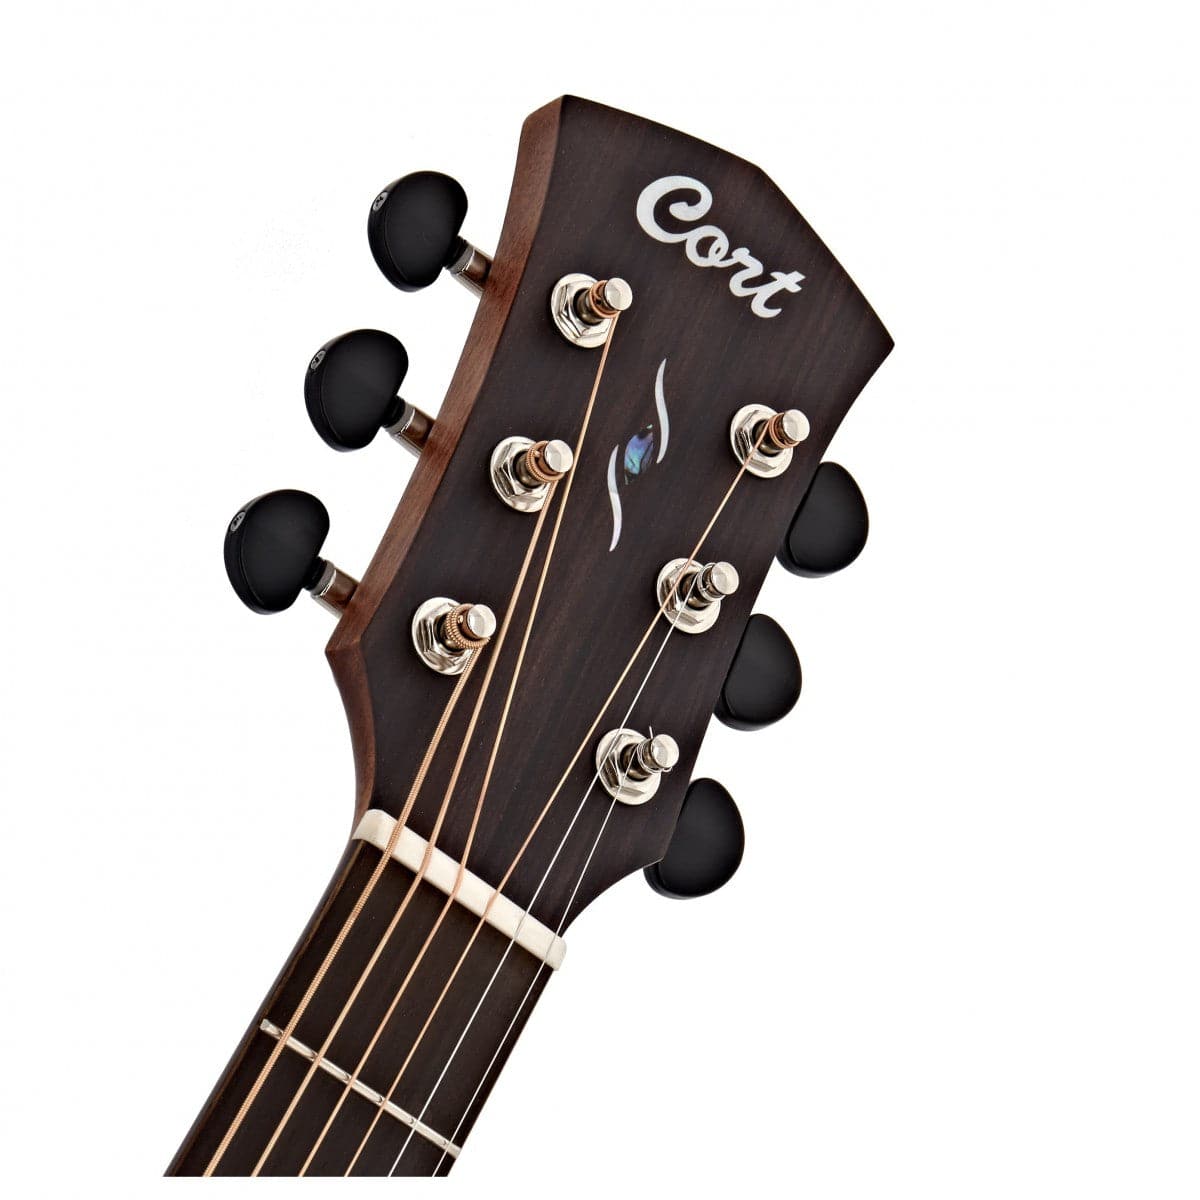 Cort Core Electro Acoustic Guitar - Solid Spruce - Trans Black with Case